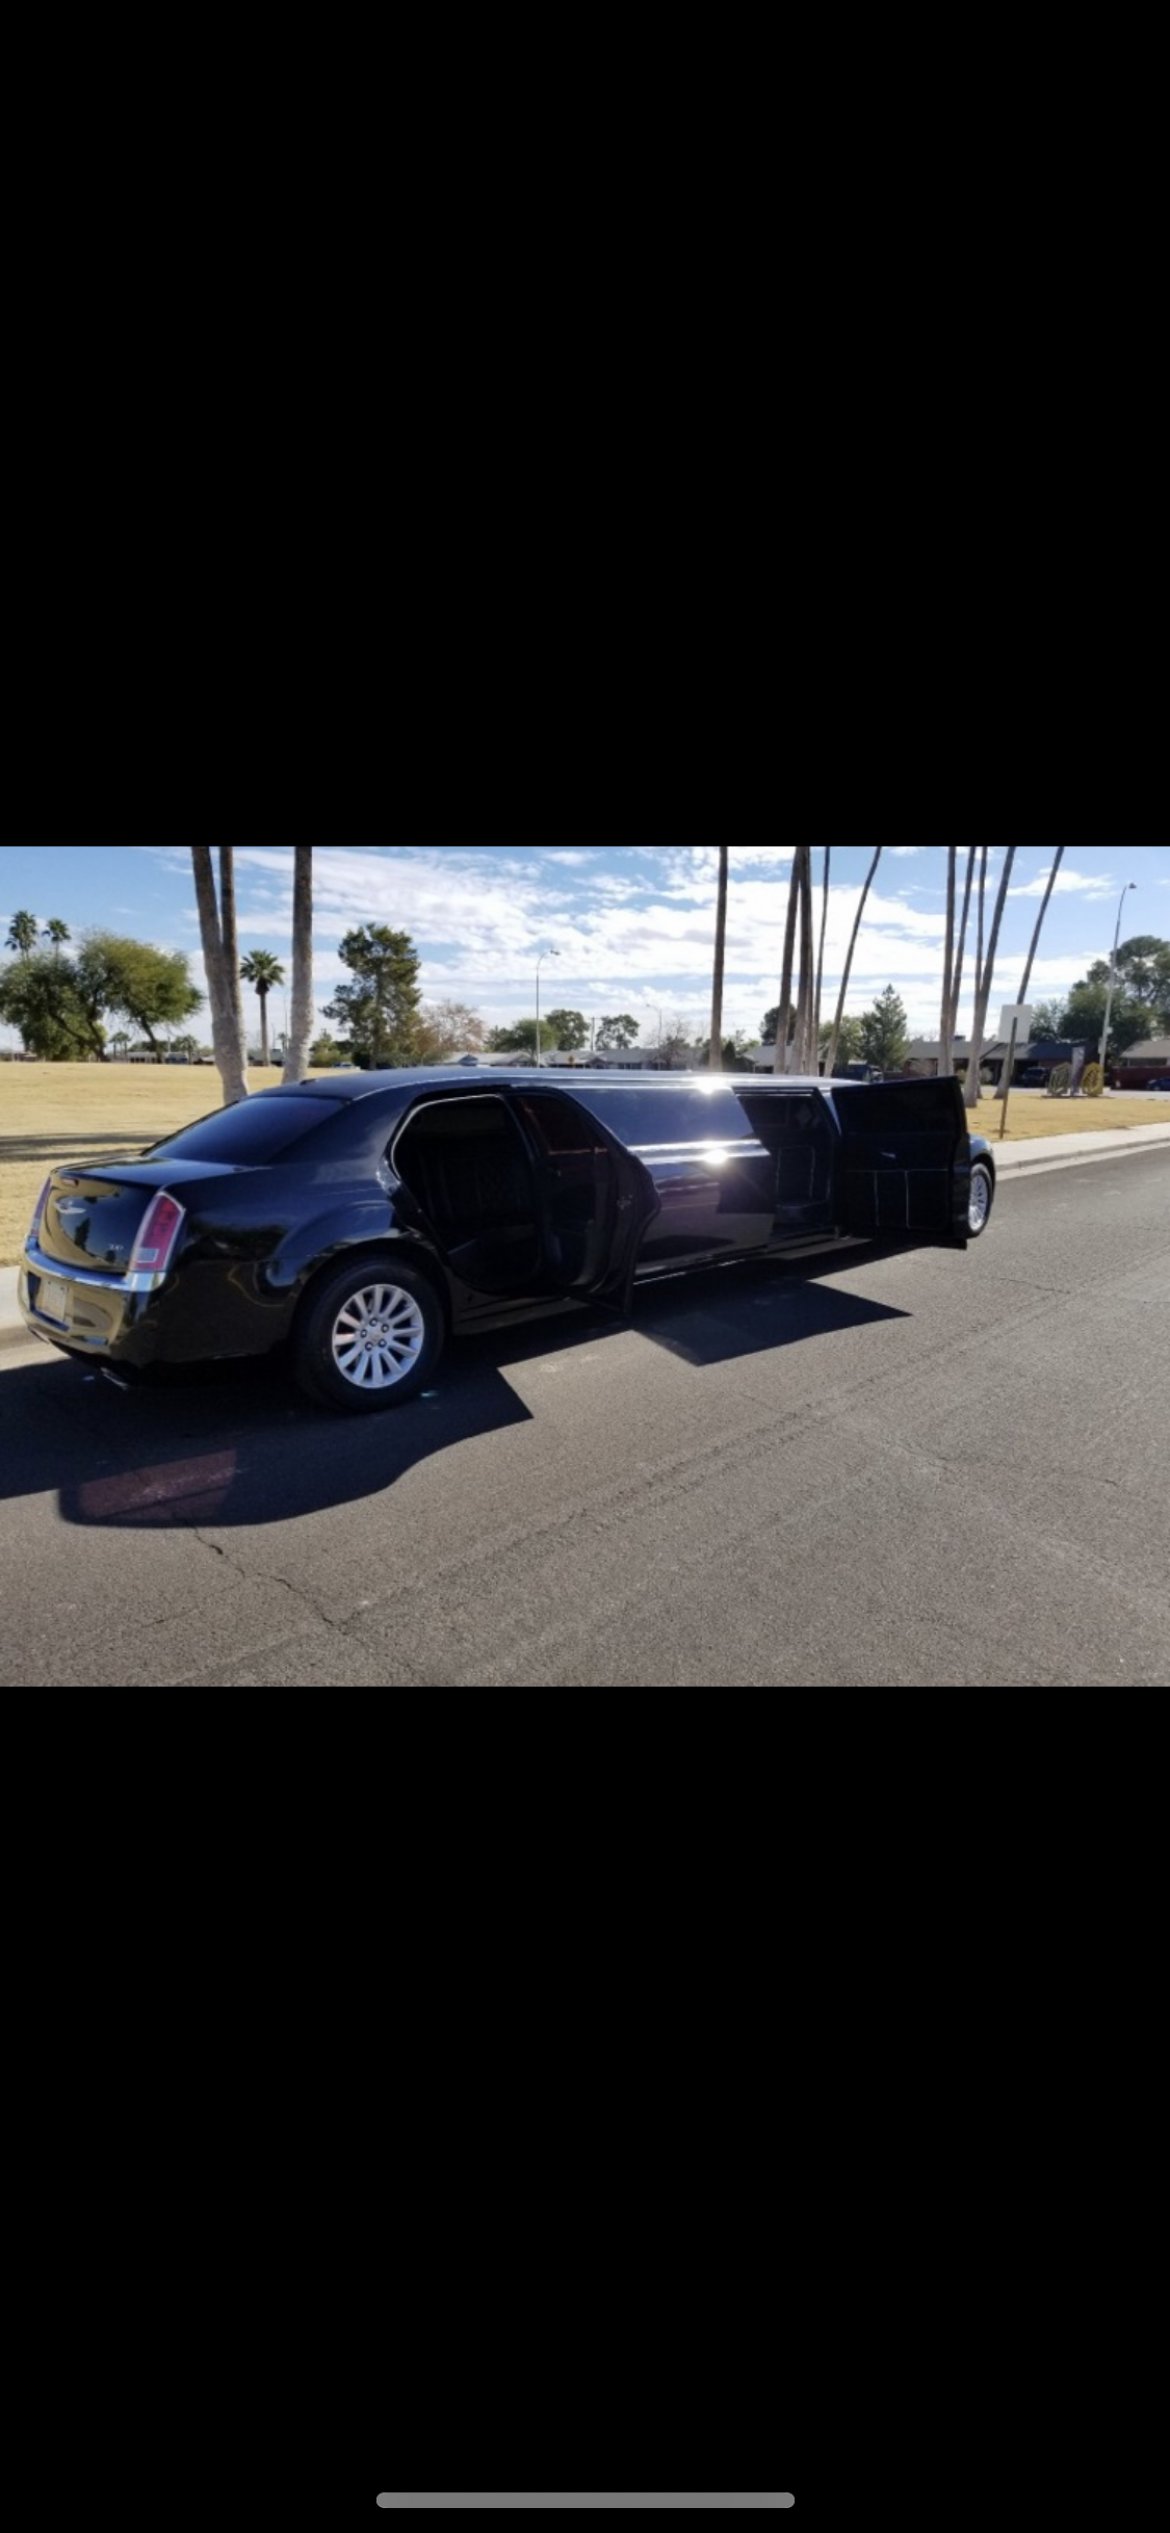 Limousine for sale: 2014 Chrysler 300 140&quot; by Tiffany coachworks